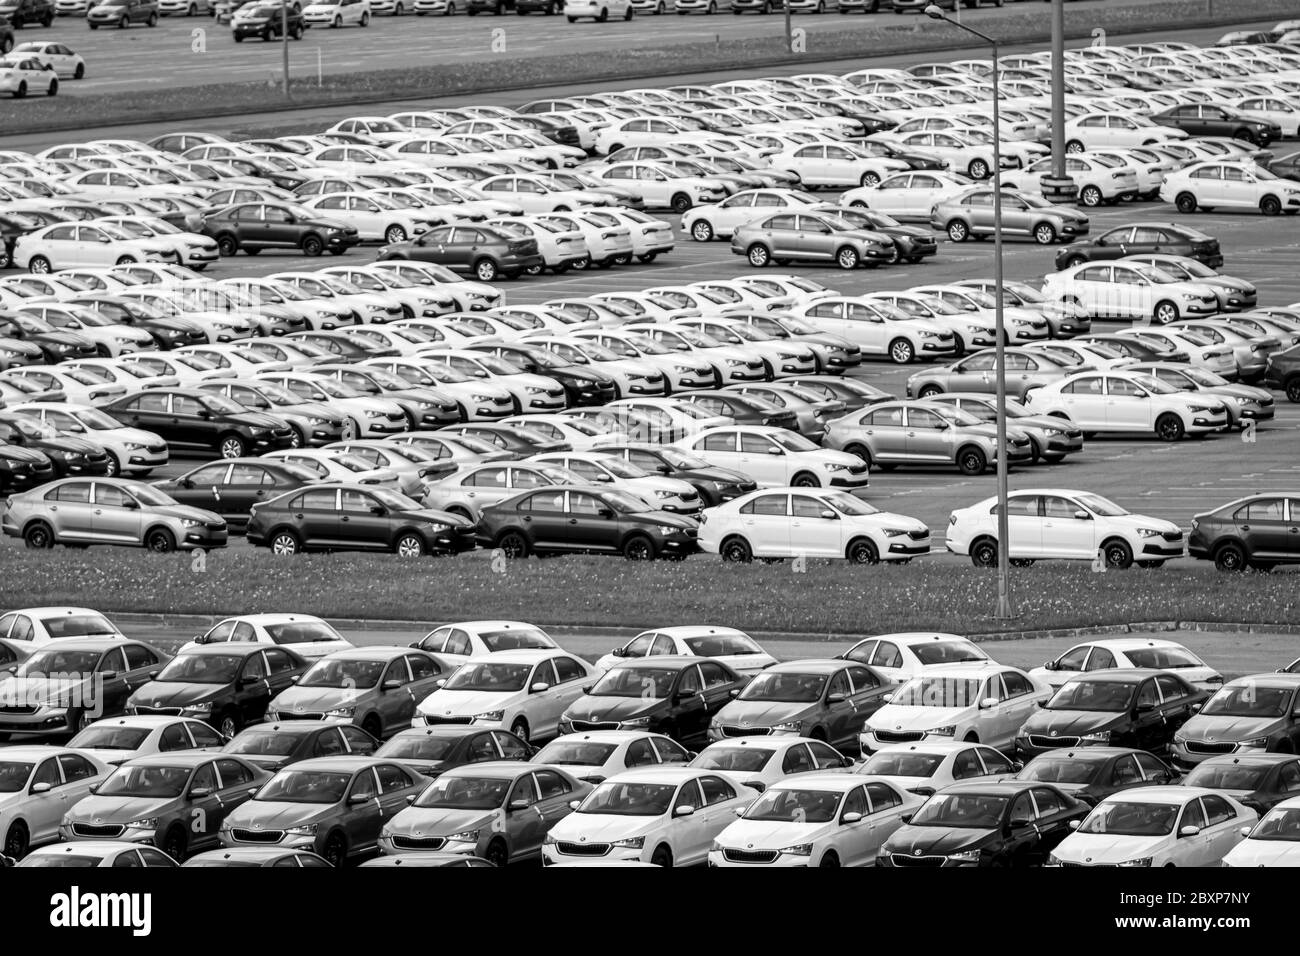 Volkswagen Group Rus, Russia, Kaluga  - MAY 24, 2020: Rows of a new cars parked in a distribution center. Top view to the parking in the open air. Stock Photo